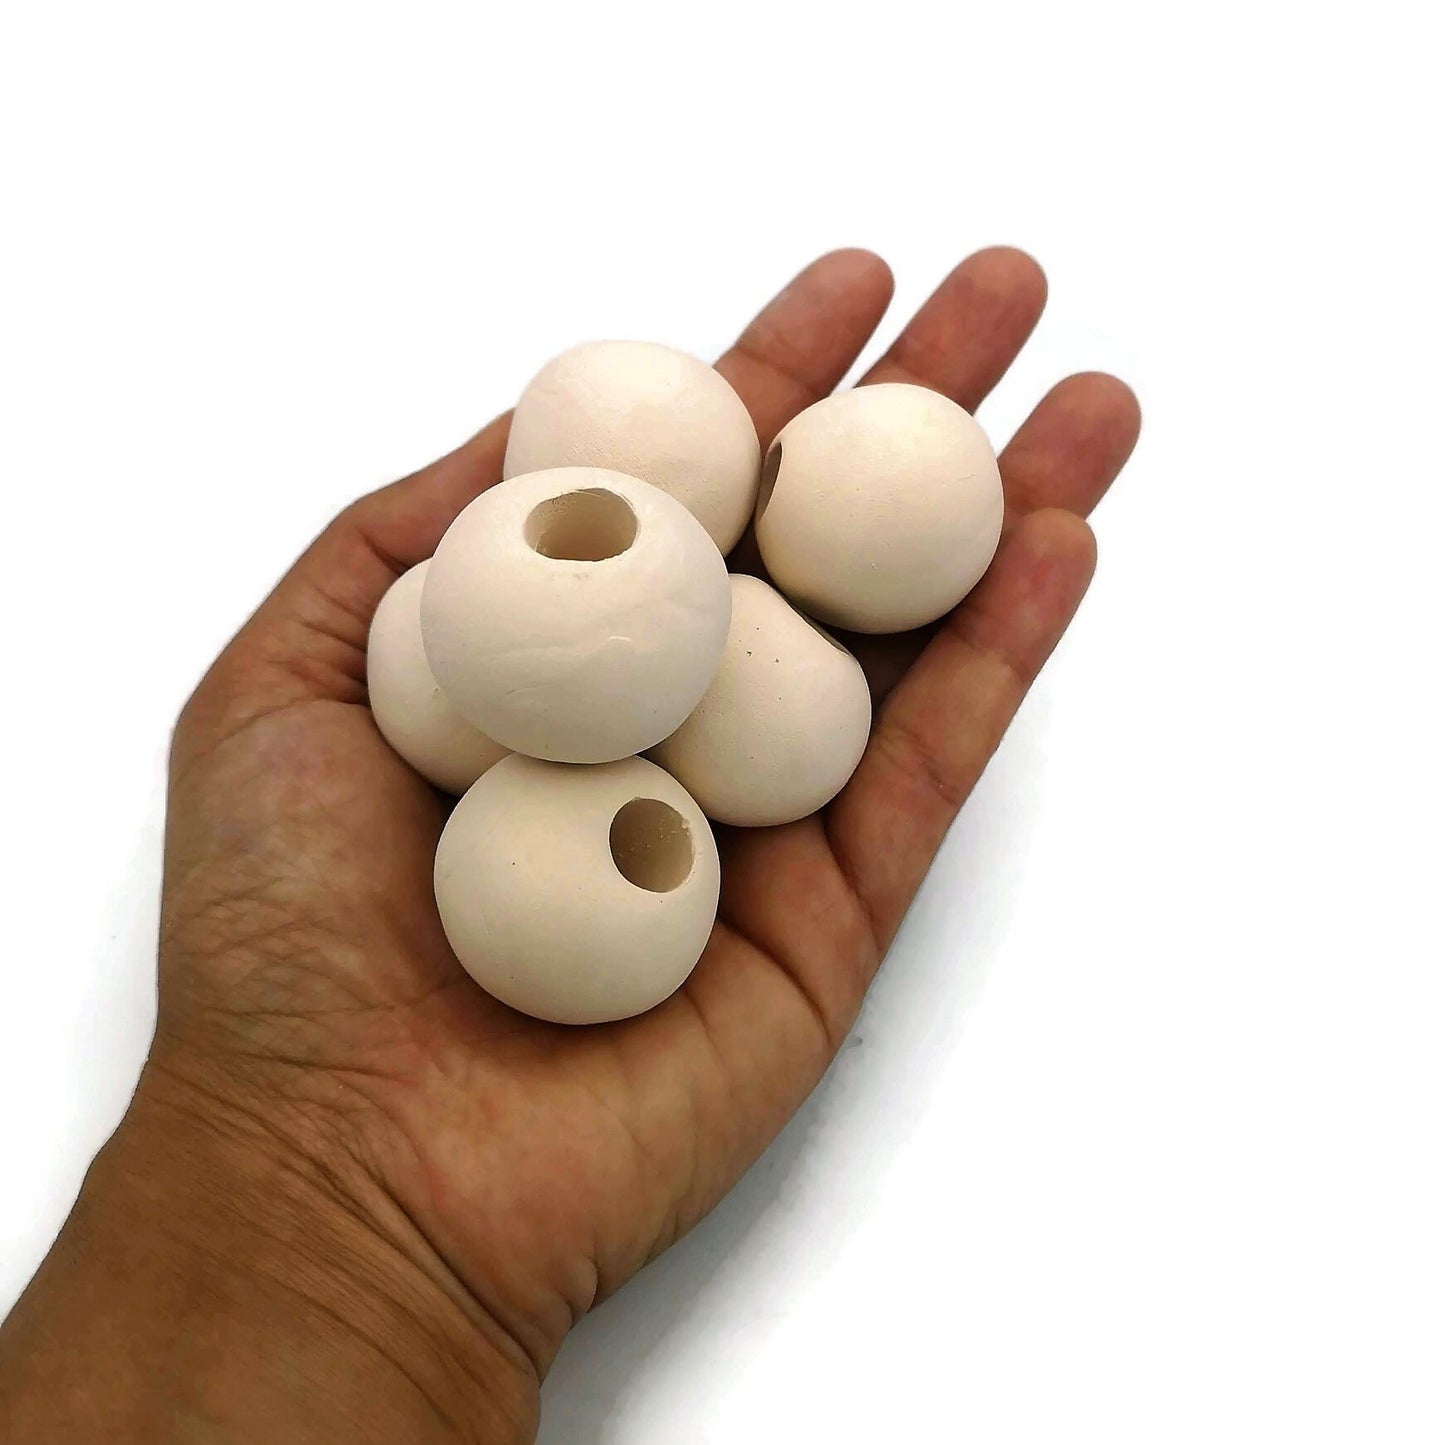 6Pc Handmade Ceramic Bisque Beads Ready To Paint, Oversized Beads for Jewelry Making Supplies Unglazed, Large Hole Macrame Beads Unpainted - Ceramica Ana Rafael